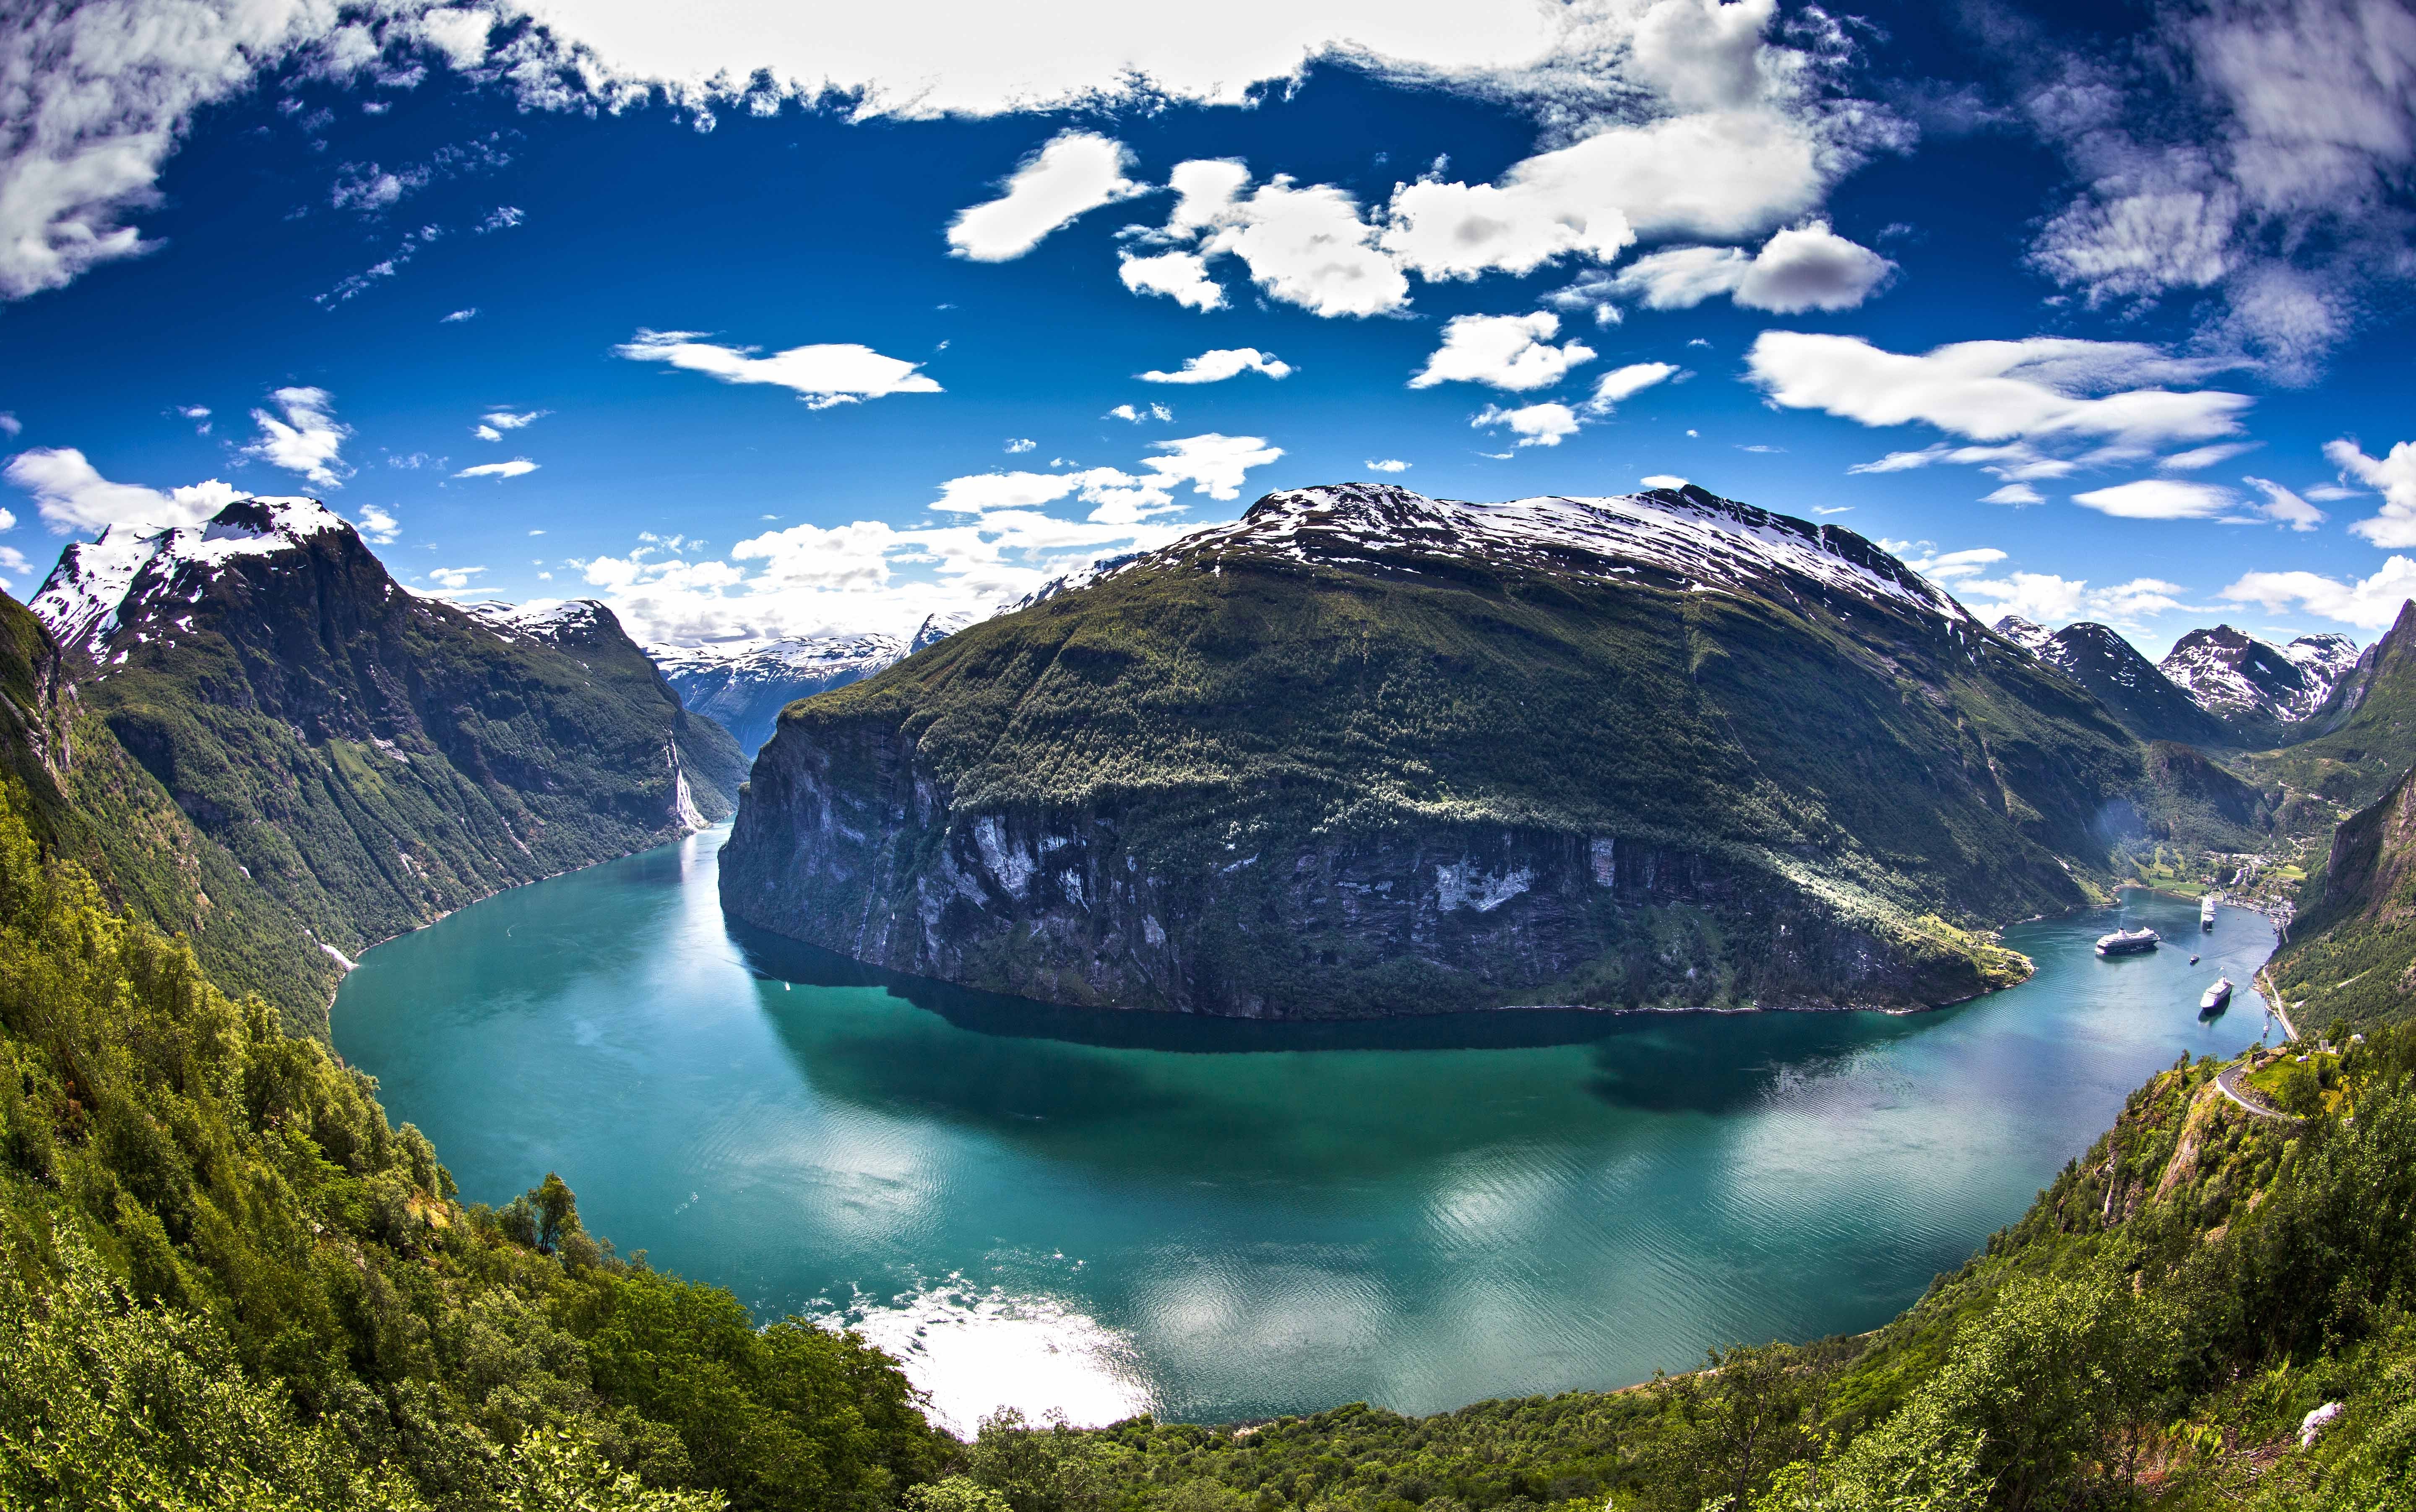 panoramas, Norway, Geiranger, Cruise Ship, Mountain, Forest, Snowy Peak, Clouds, Water, Green, Blue, White, Sea, Nature, Landscape Wallpaper